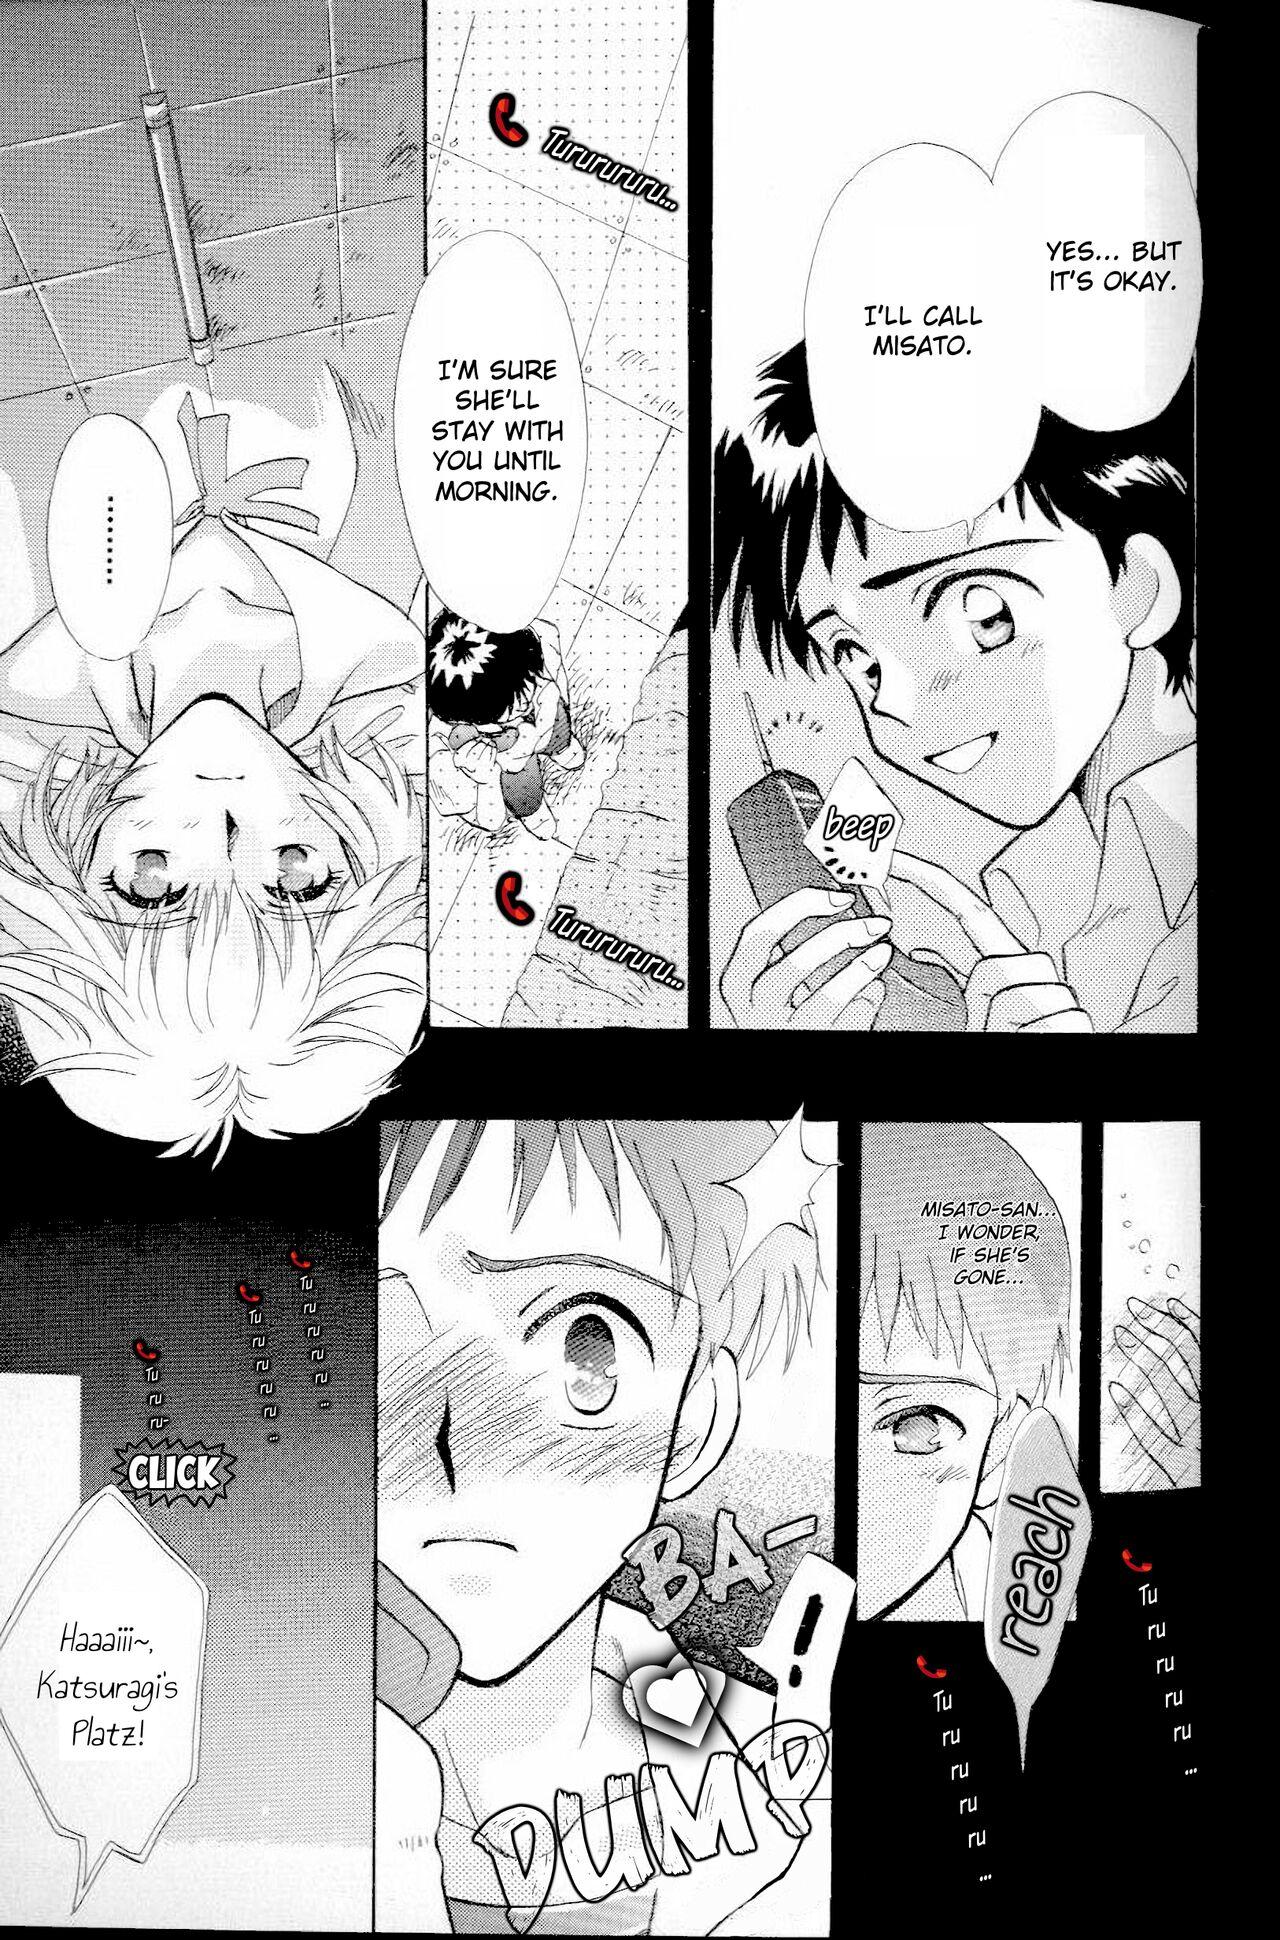 Girls How To Fly In The Sky - Please Be True Episode 0:1 - Neon genesis evangelion Ball Sucking - Page 11